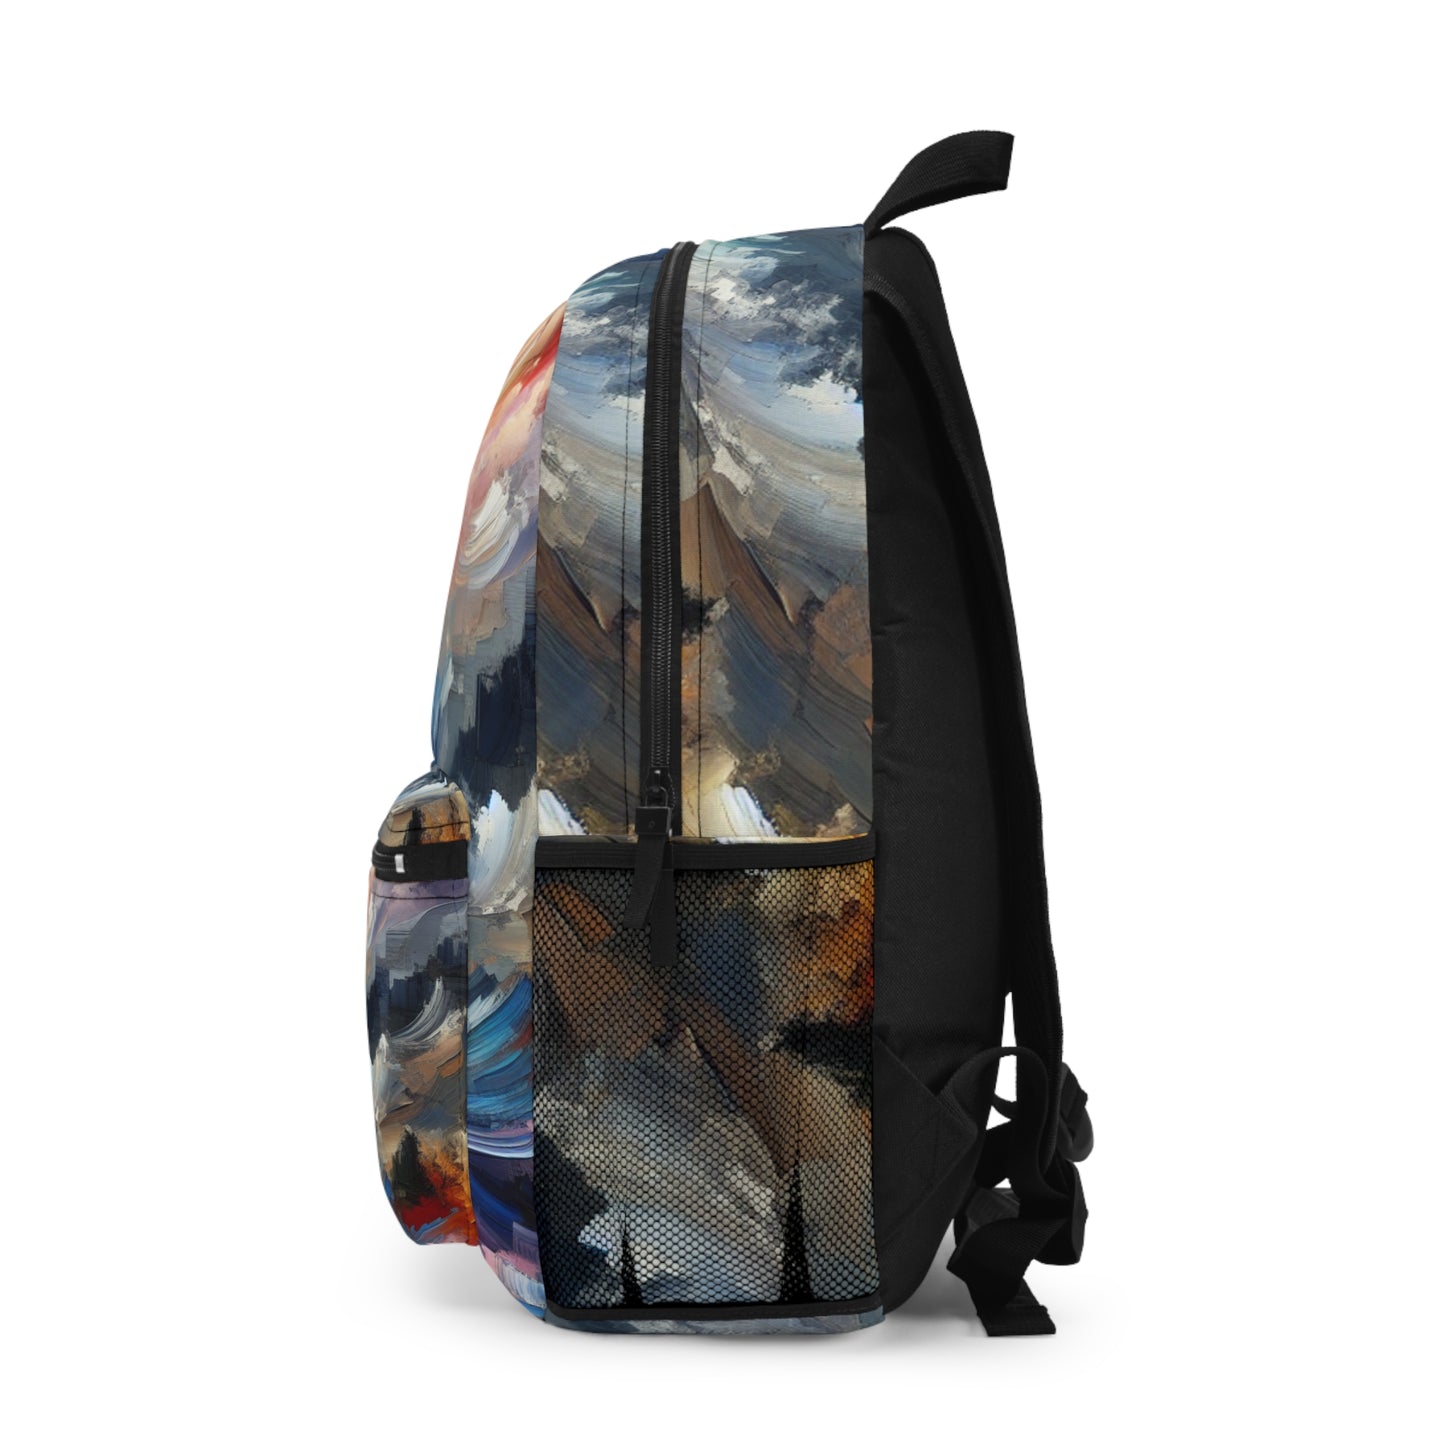 "Abstract Landscape: Exploring Emotional Depths Through Color & Texture" - The Alien Backpack Abstract Expressionism Style